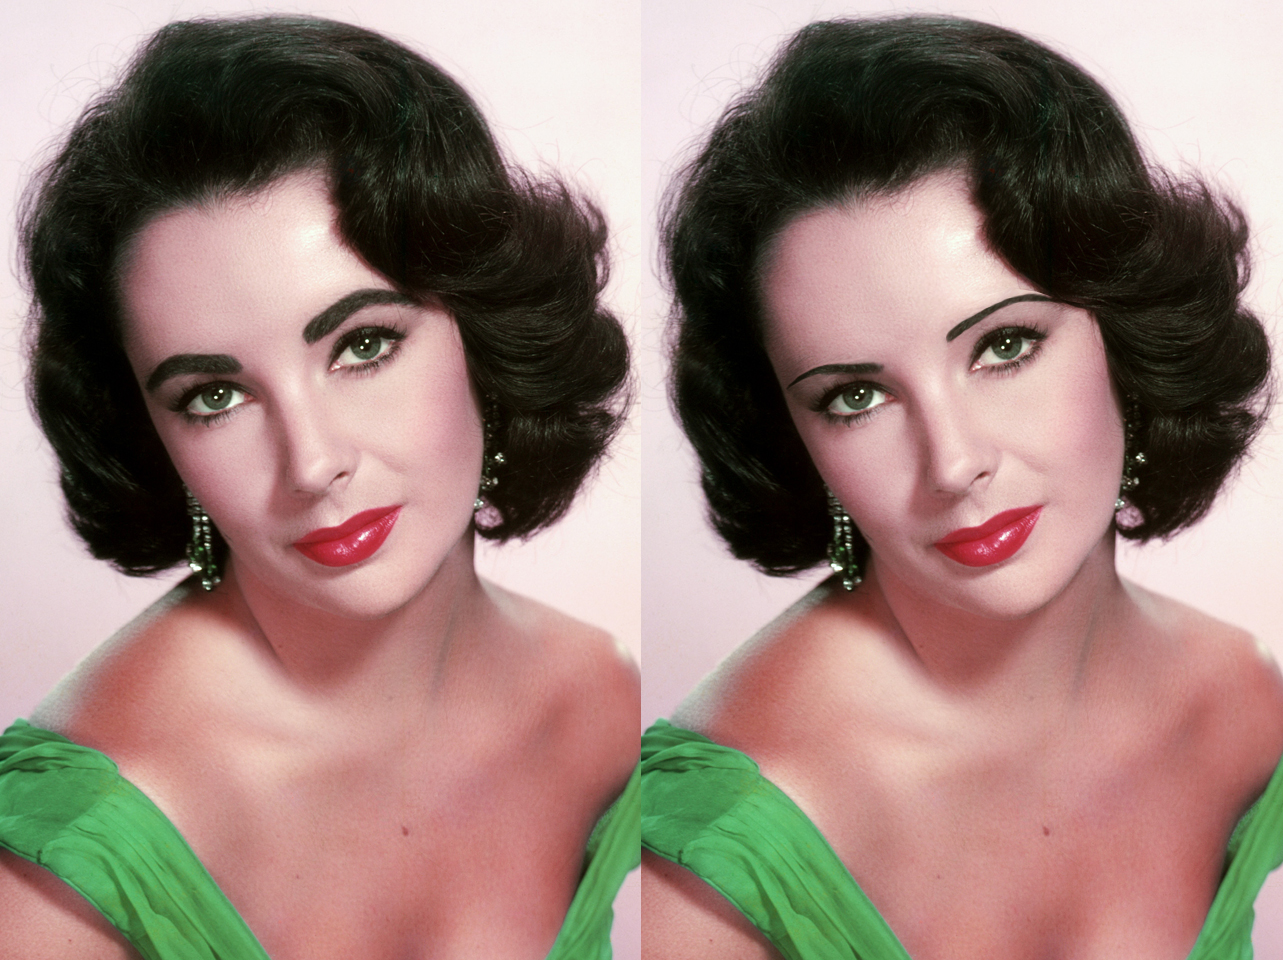 Elizabeth Taylor's signature brows from the 1950s vs a digitally edited thin-brow look | Source: Getty Images